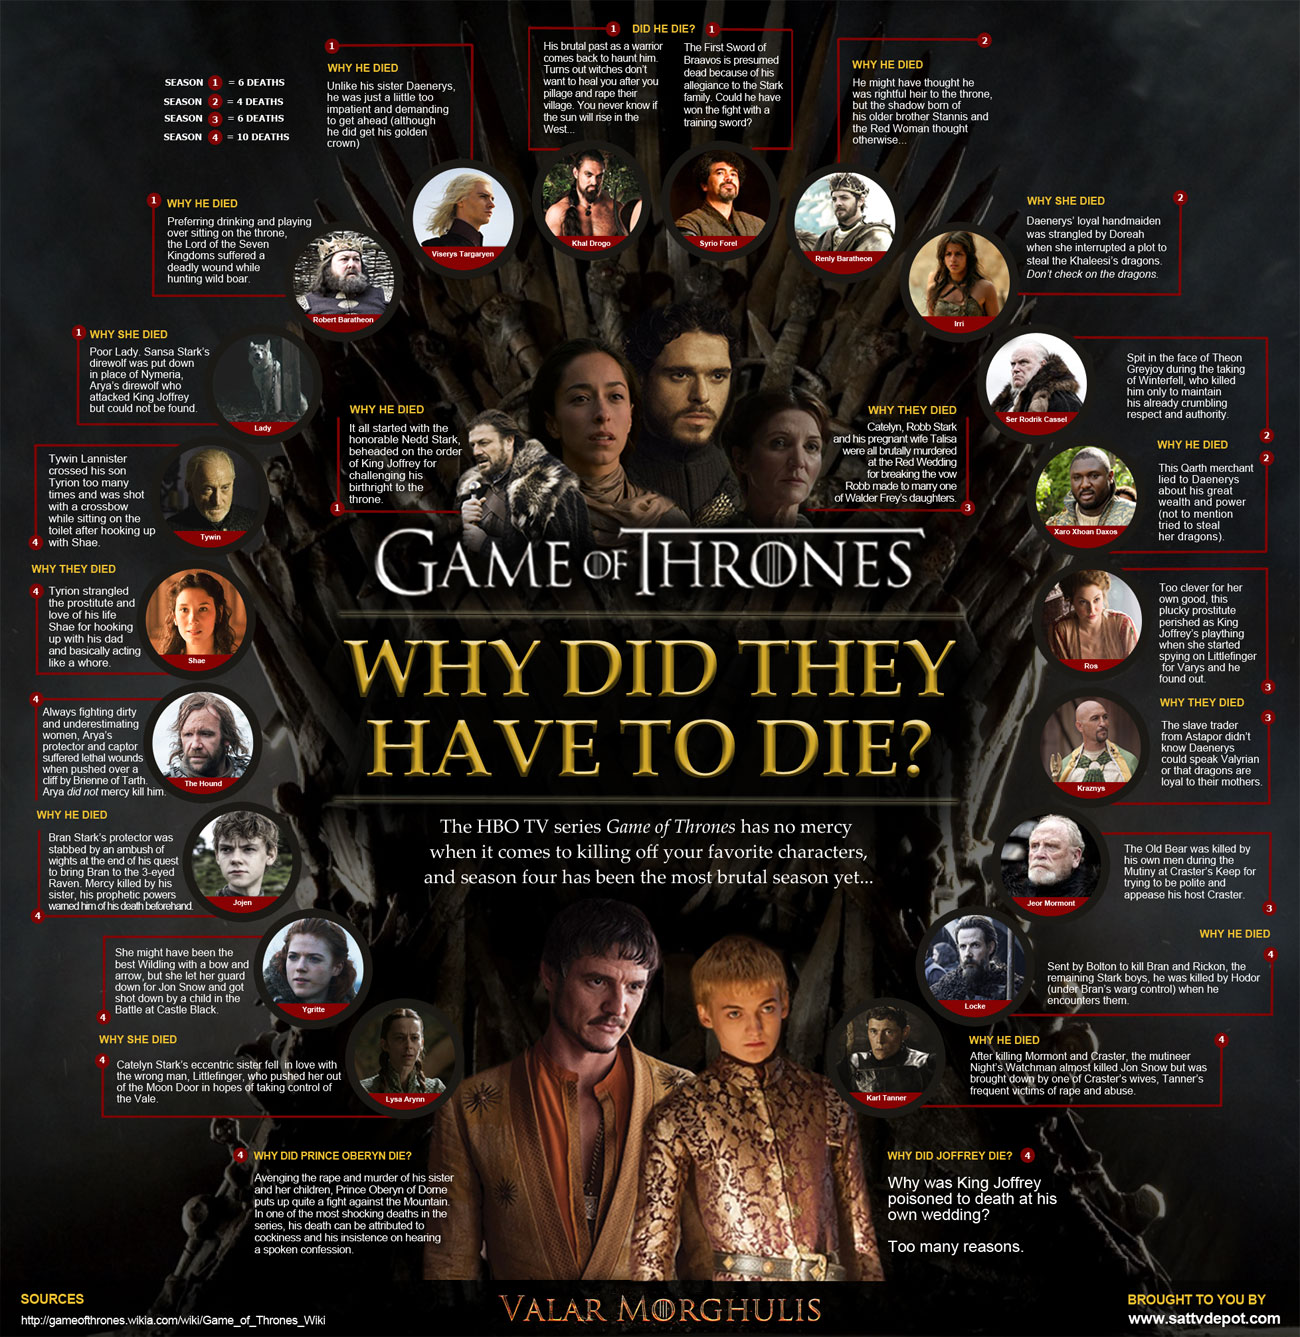 game-of-thrones-infographic-why-did-they-have-to-die-1.jpg